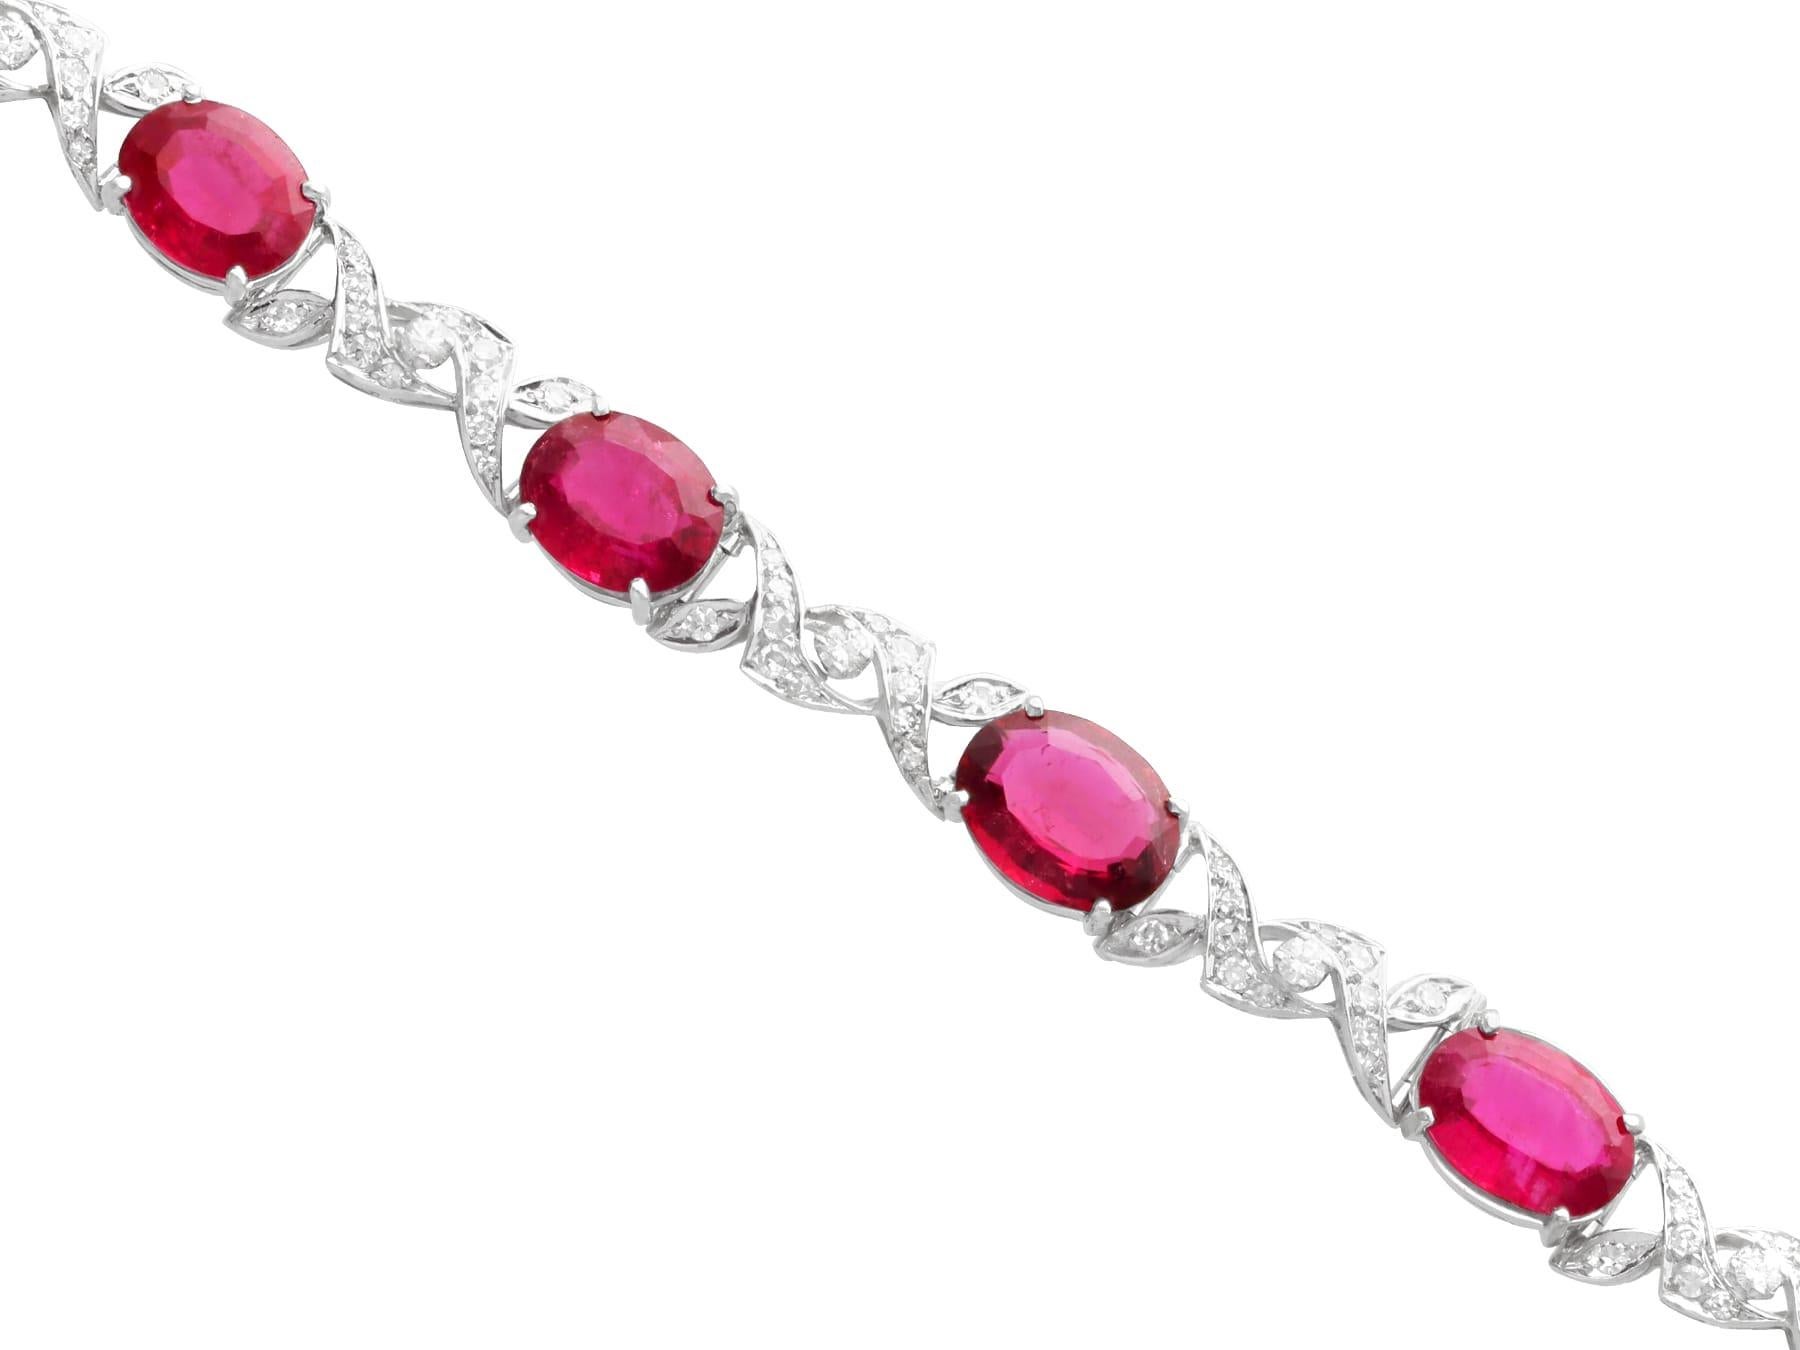 Antique 2.52 Carat Pink Tourmaline and 1.90 Carat Diamond White Gold Bracelet In Excellent Condition For Sale In Jesmond, Newcastle Upon Tyne